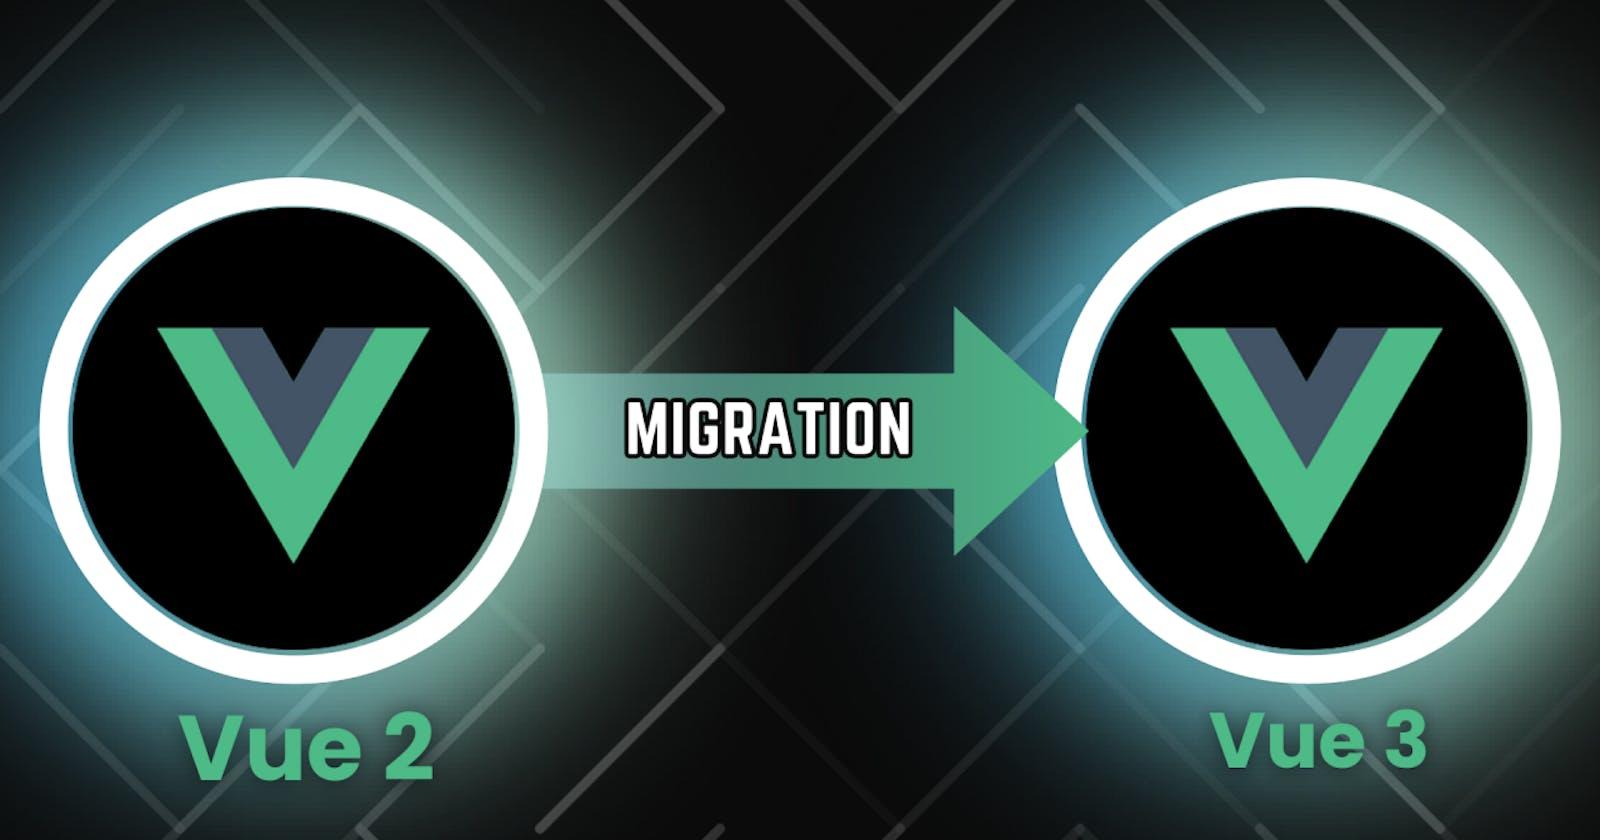 My experience with migrating from Vue 2 to Vue 3